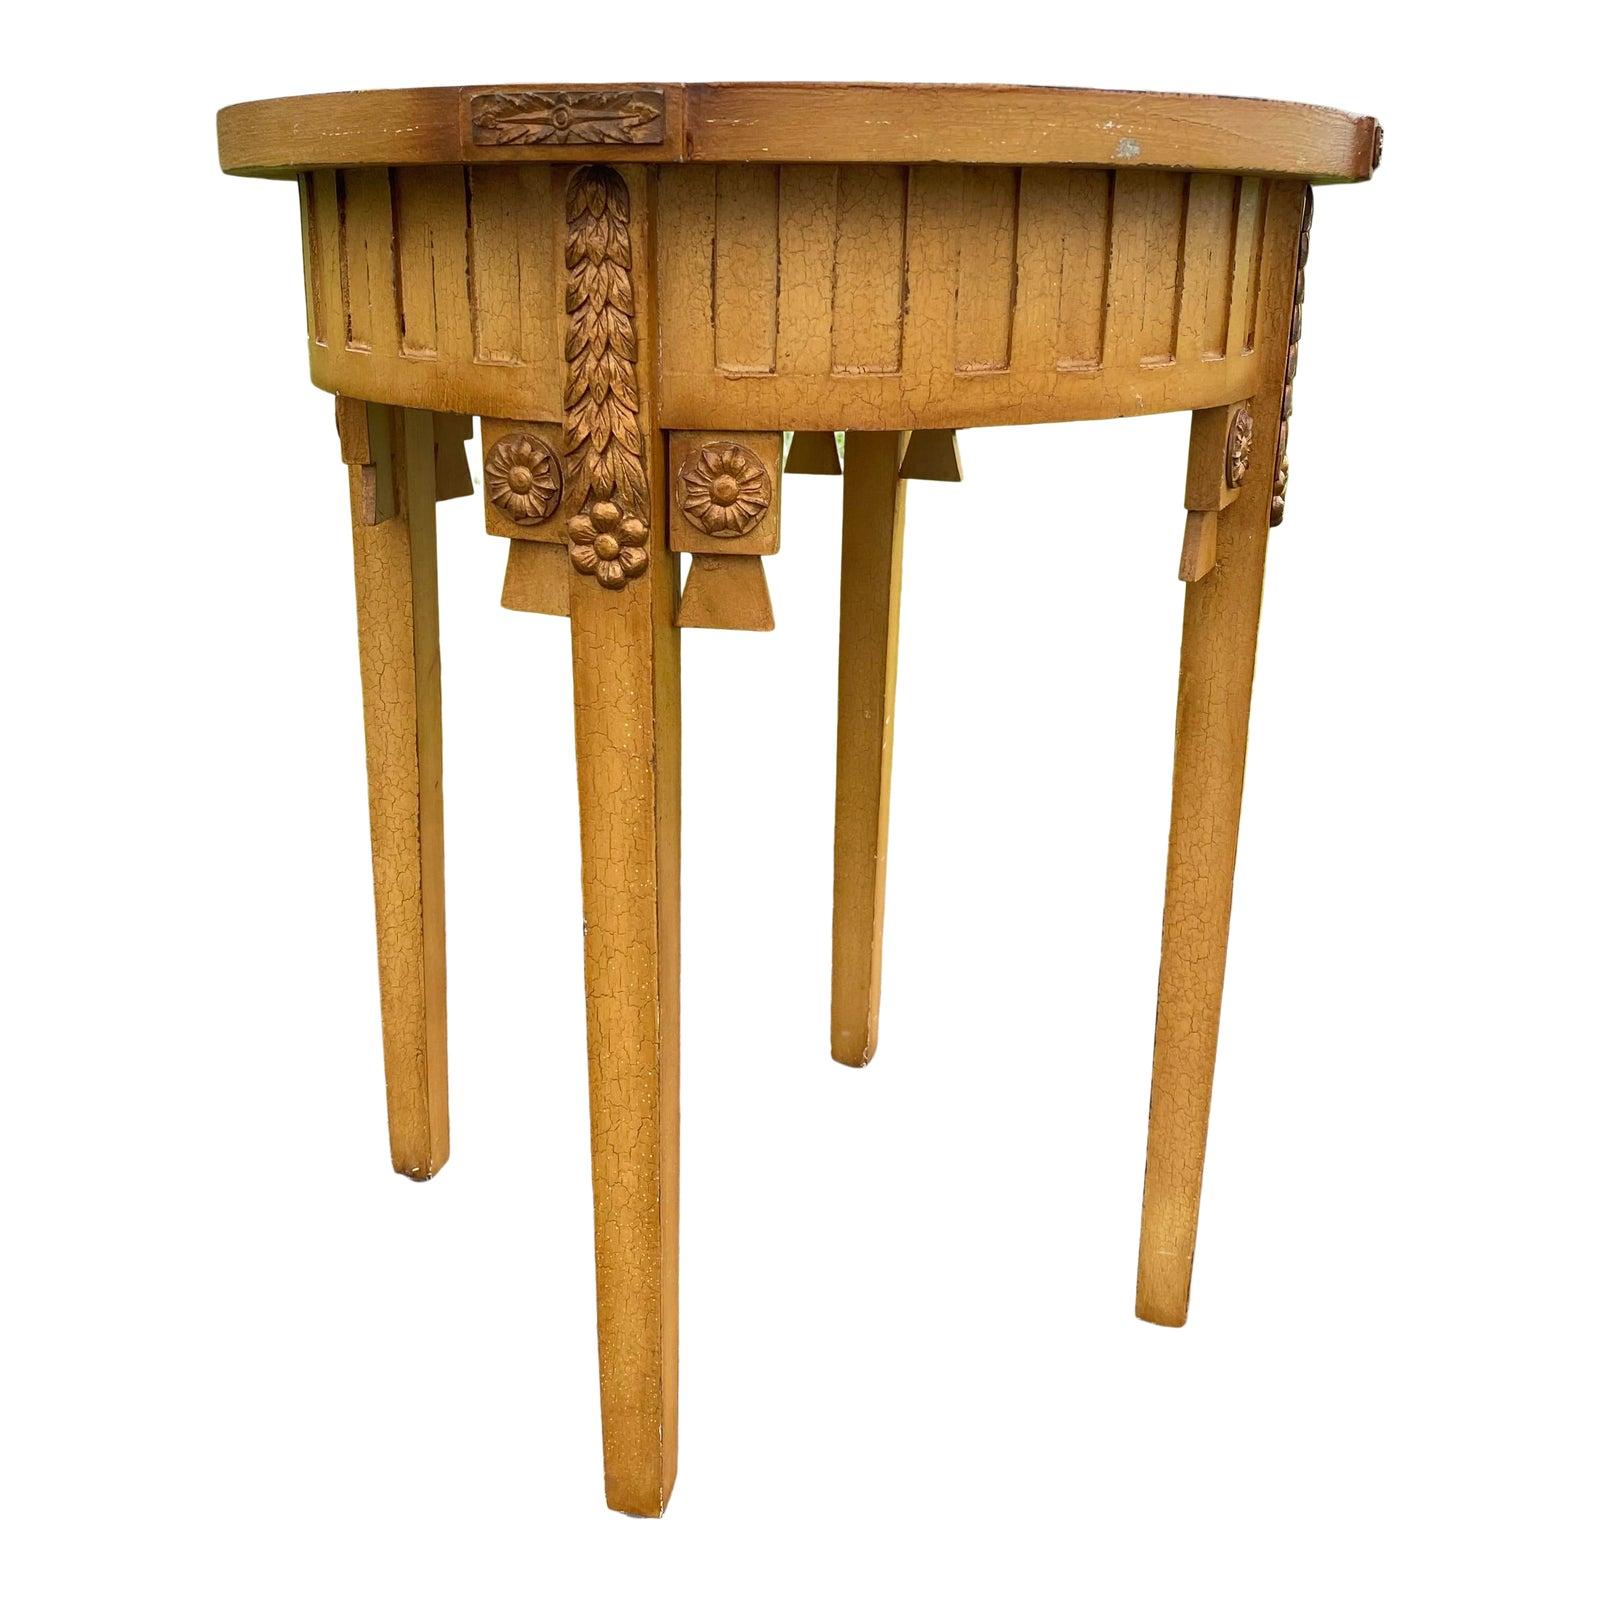 Neoclassical style tall round table featuring decorative medallions and botanical carvings highlighted by gilt accents. Can be used as a center table or a tall side end table. This four legged table has a glazed textural crackle finish.

Please